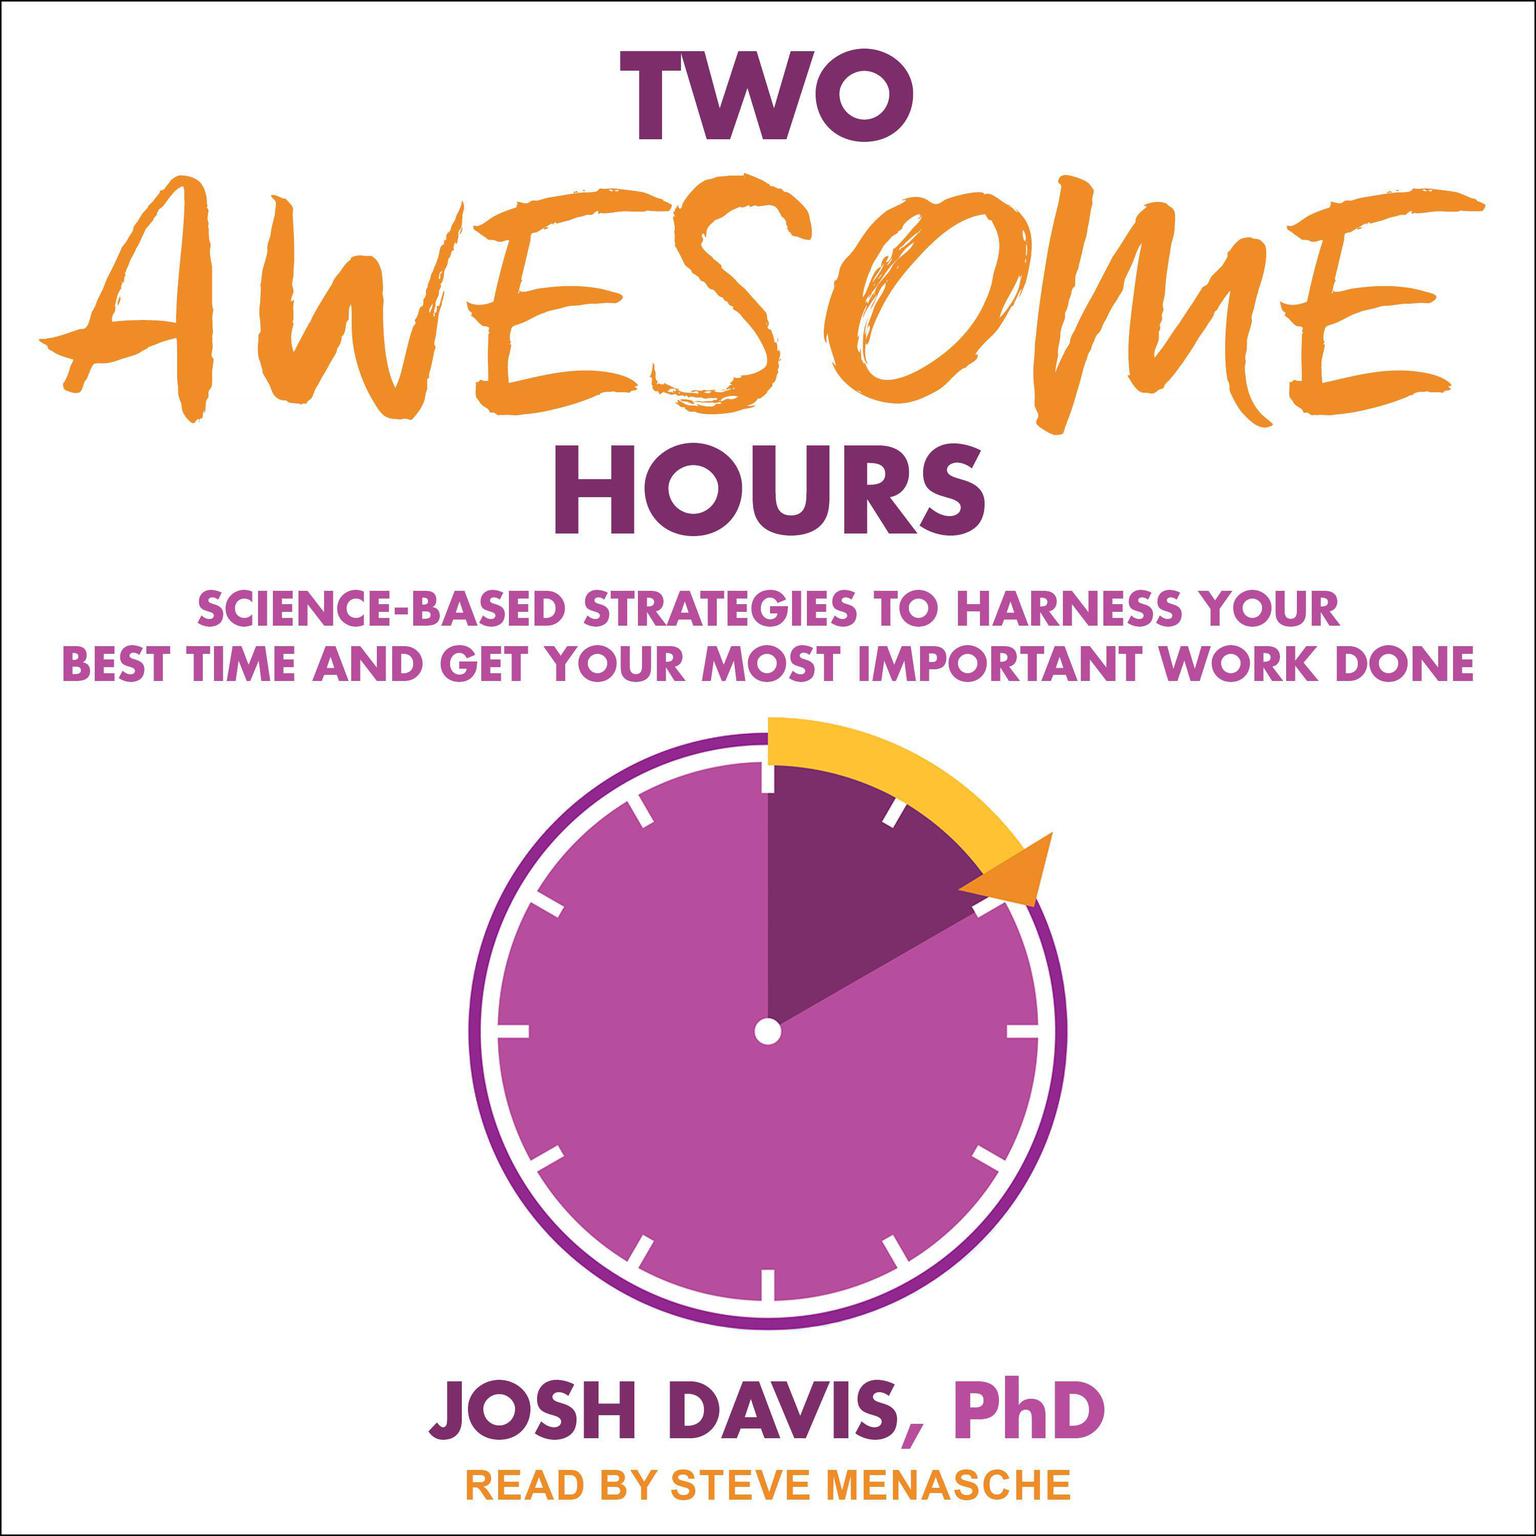 Two Awesome Hours: Science-Based Strategies to Harness Your Best Time and Get Your Most Important Work Done Audiobook, by Josh Davis